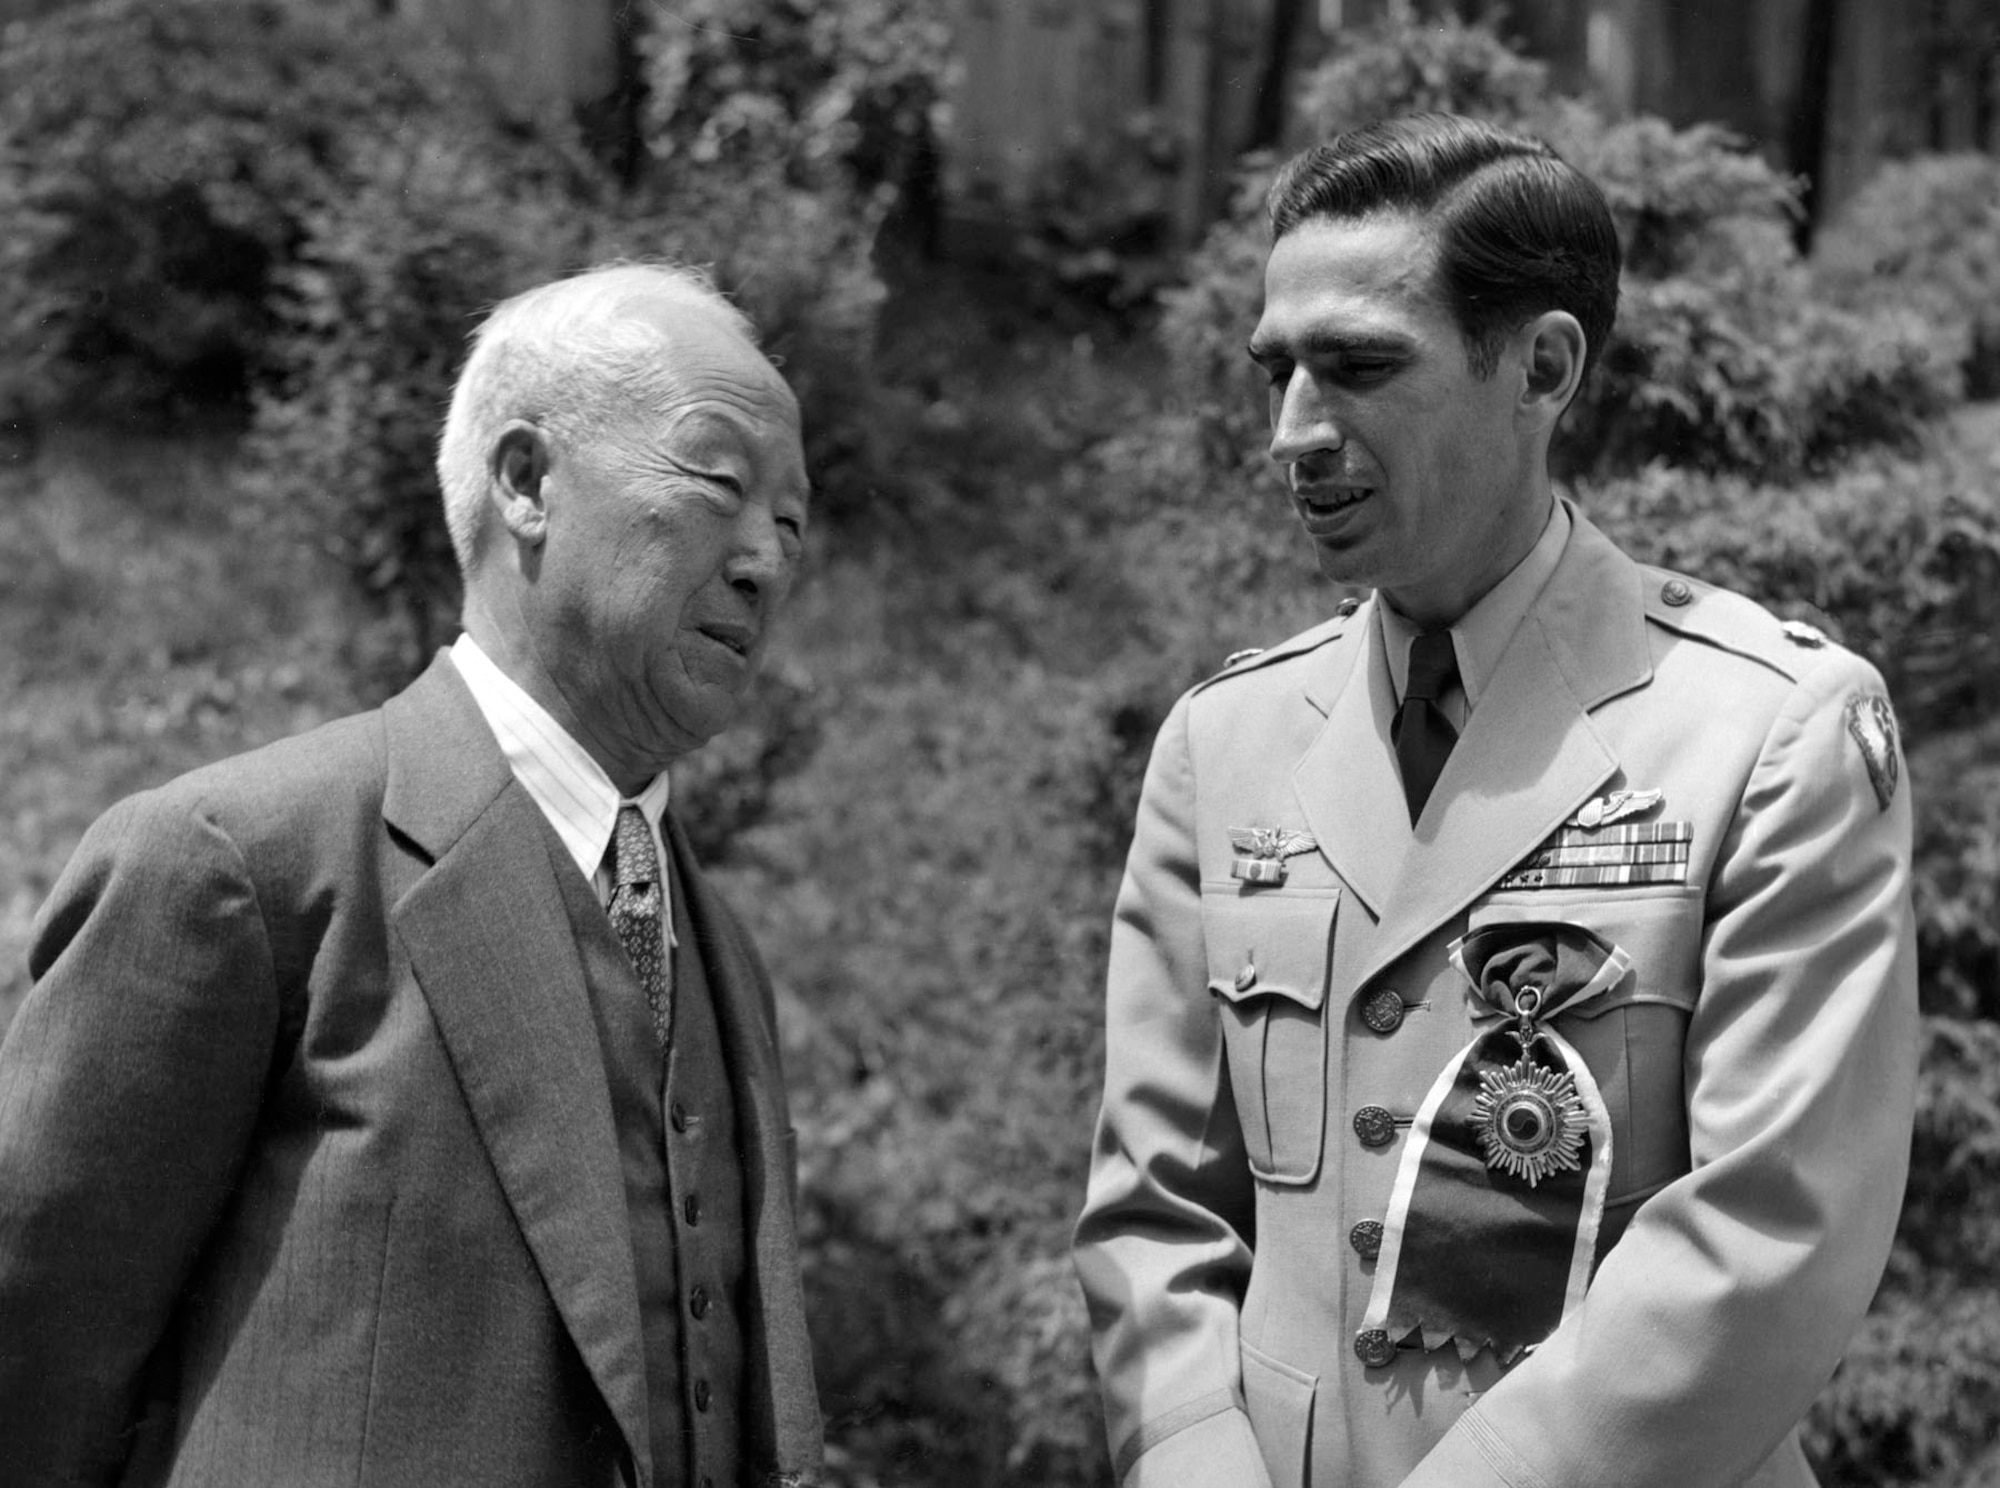 South Korean president Syngman Rhee presented Hess with this decoration in 1951 for his exceptional service during the Korean War. (U.S. Air Force photo)